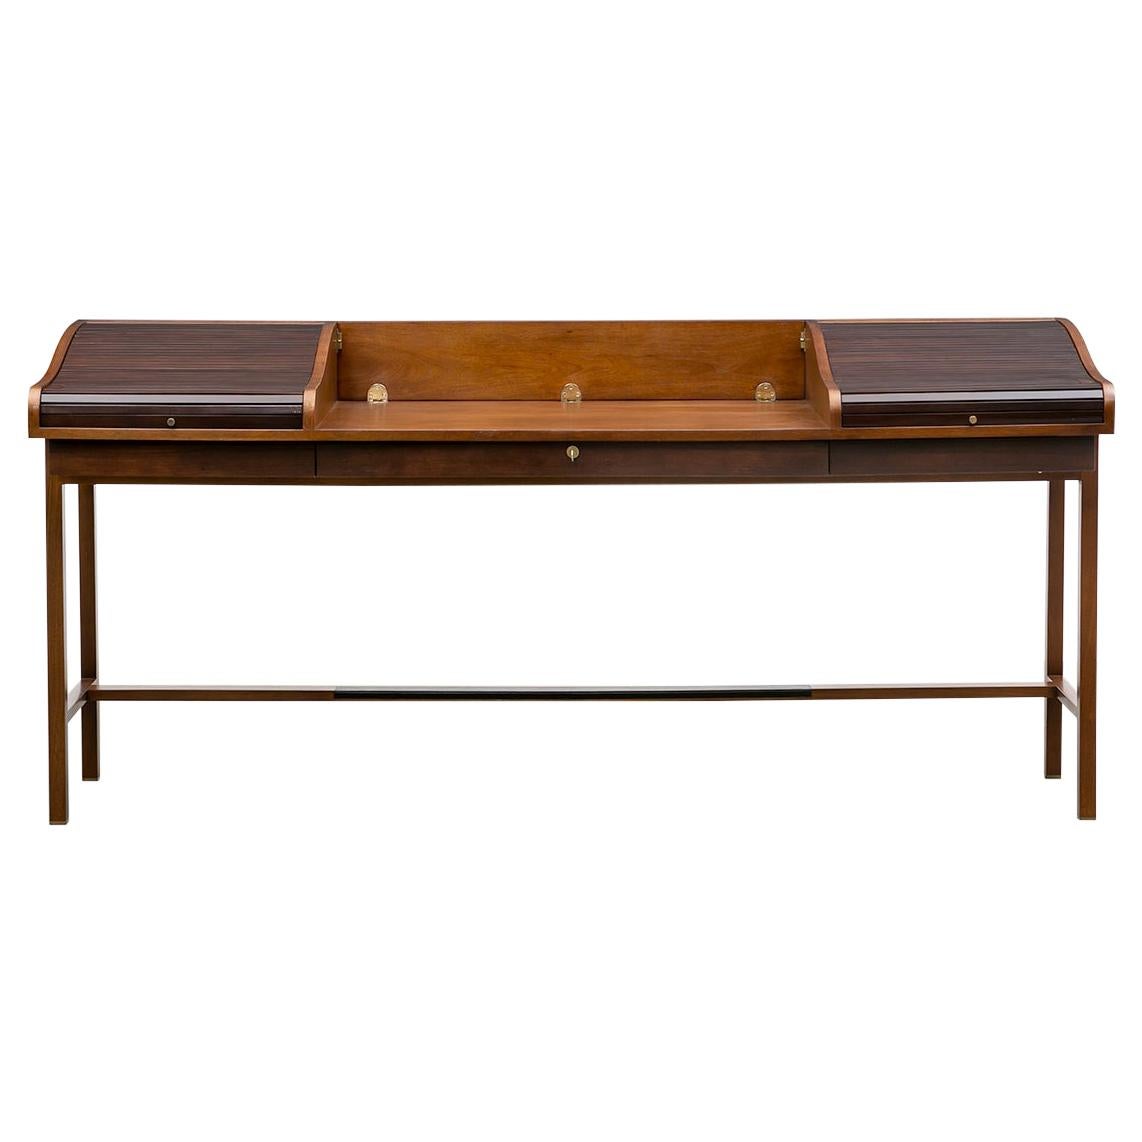 1960s Brown Wooden Desk by Edward Wormley 'c' For Sale